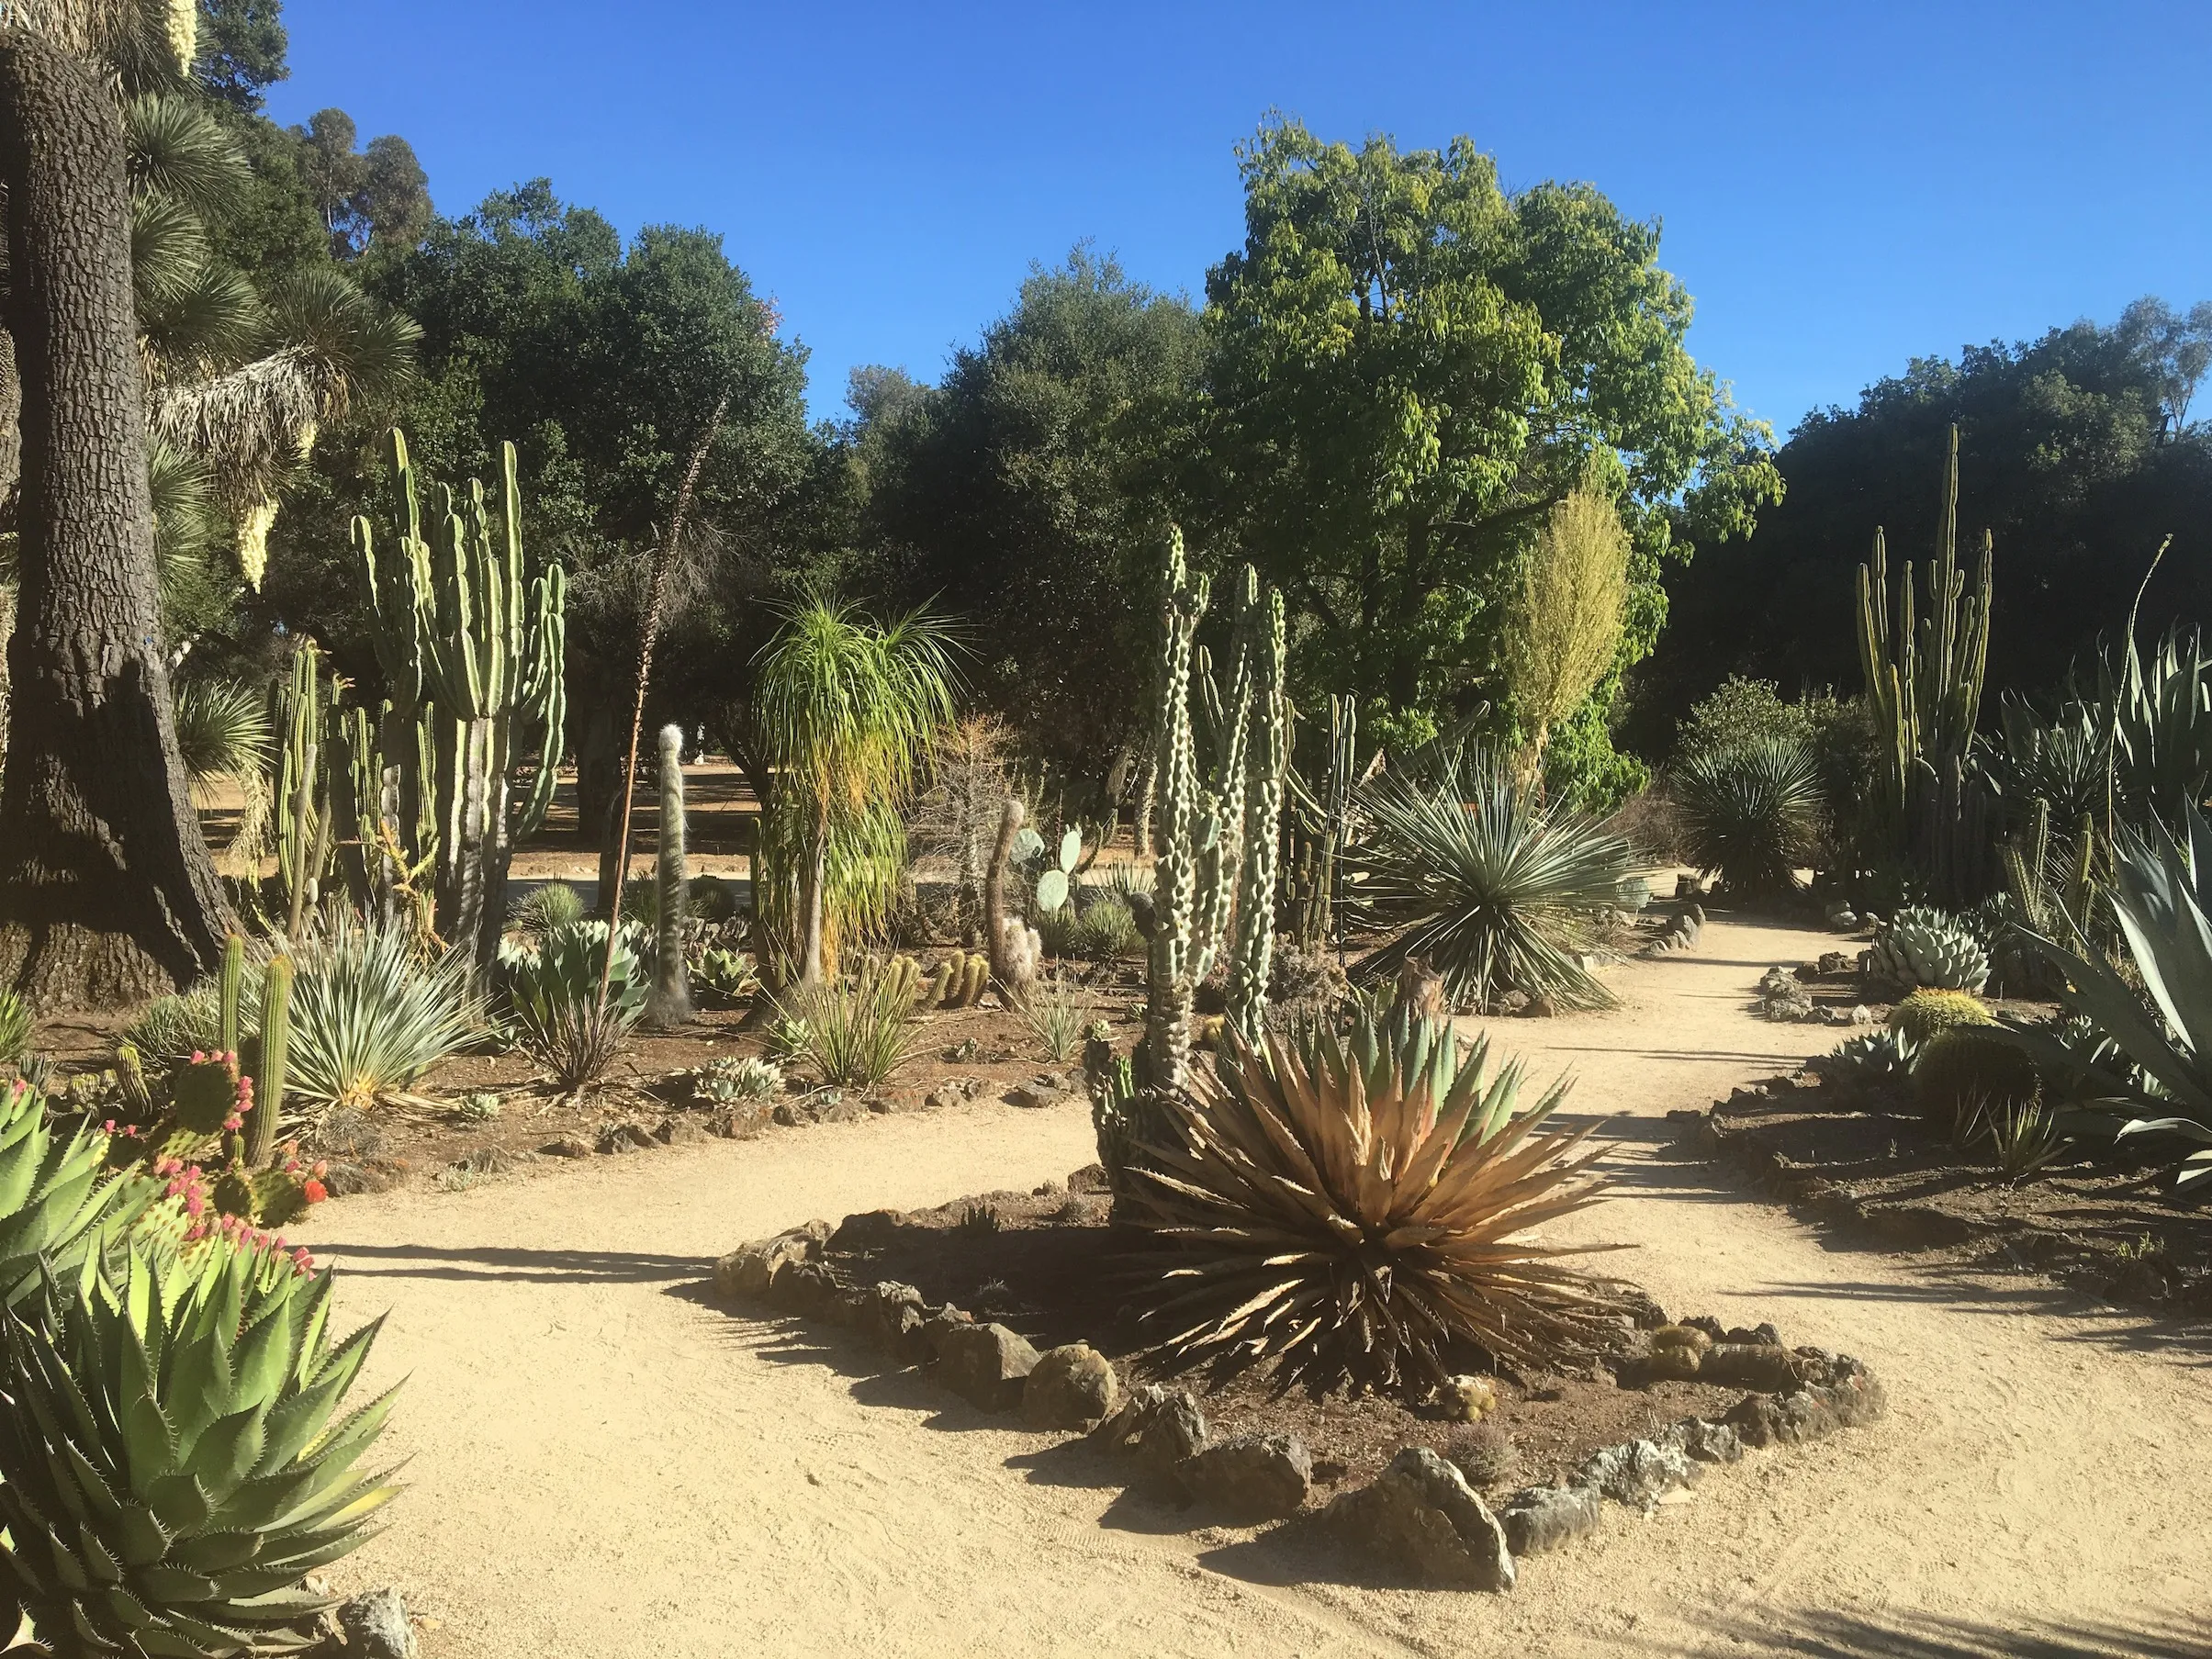 Volunteers maintain historic cactus garden   The Stanford Daily